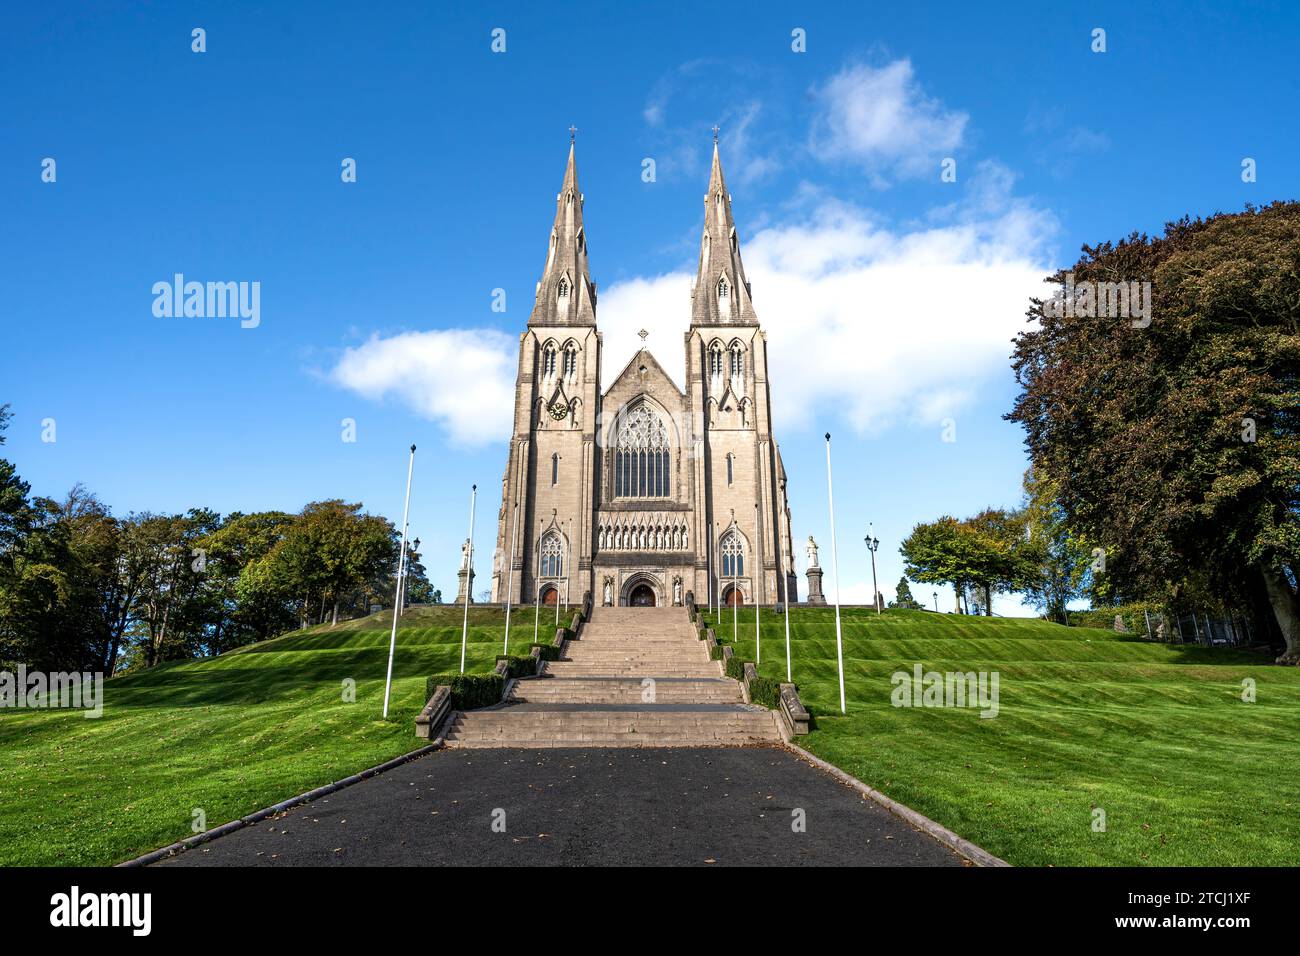 St Patrick's Cathedral, seat of the Catholic Archbishop of Armagh, Primate of All Ireland, in Armagh, Northern Ireland Stock Photo